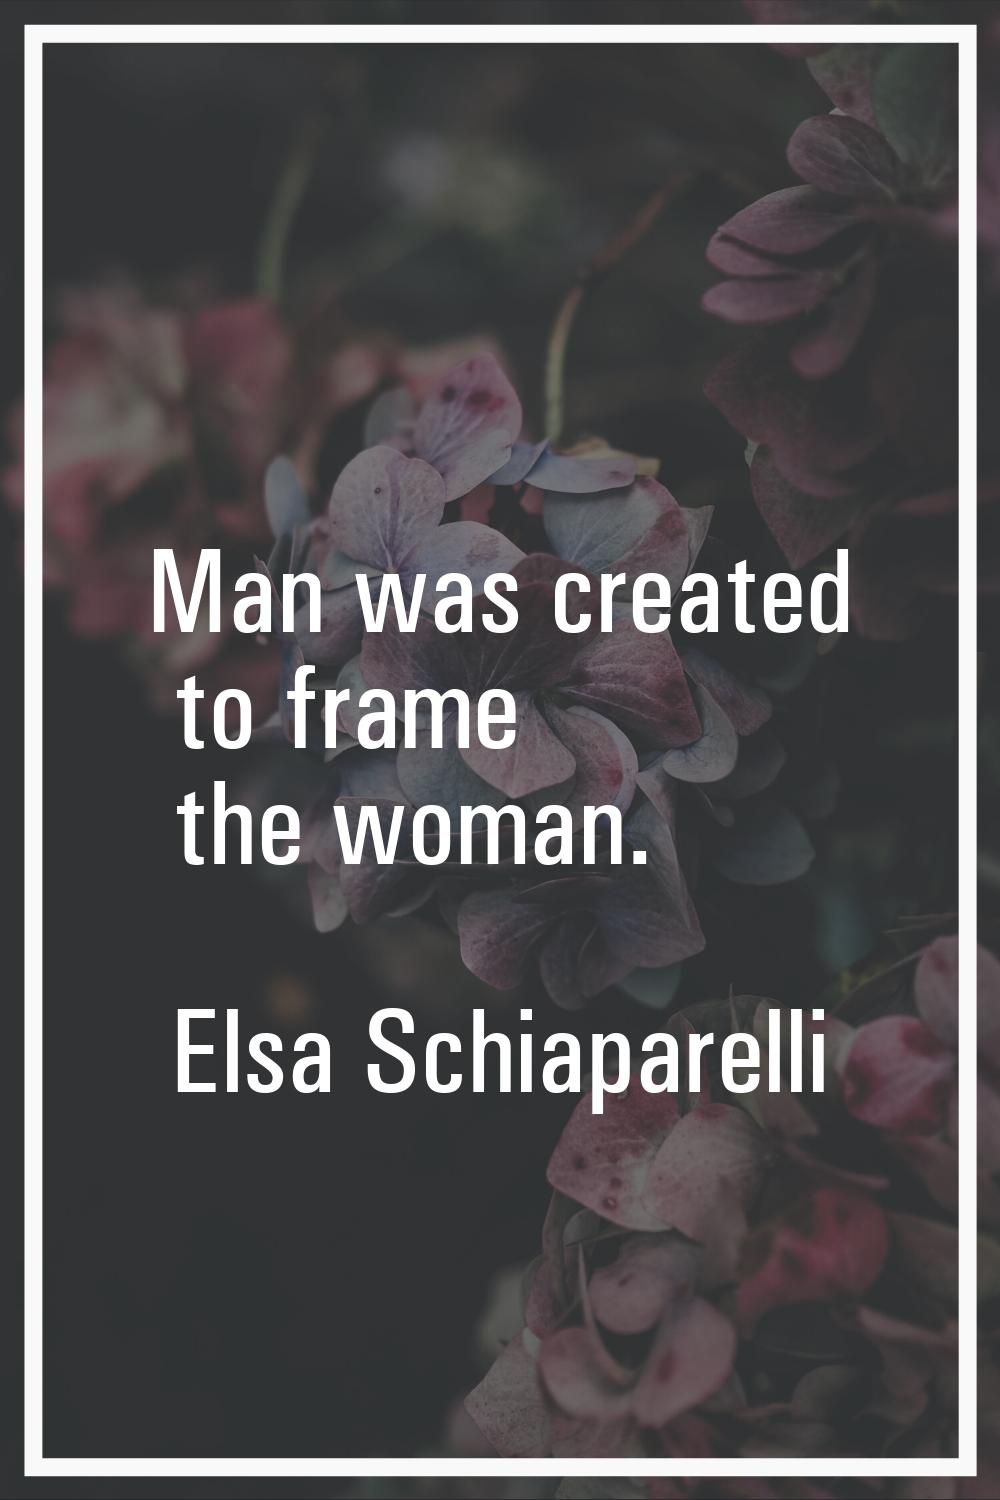 Man was created to frame the woman.